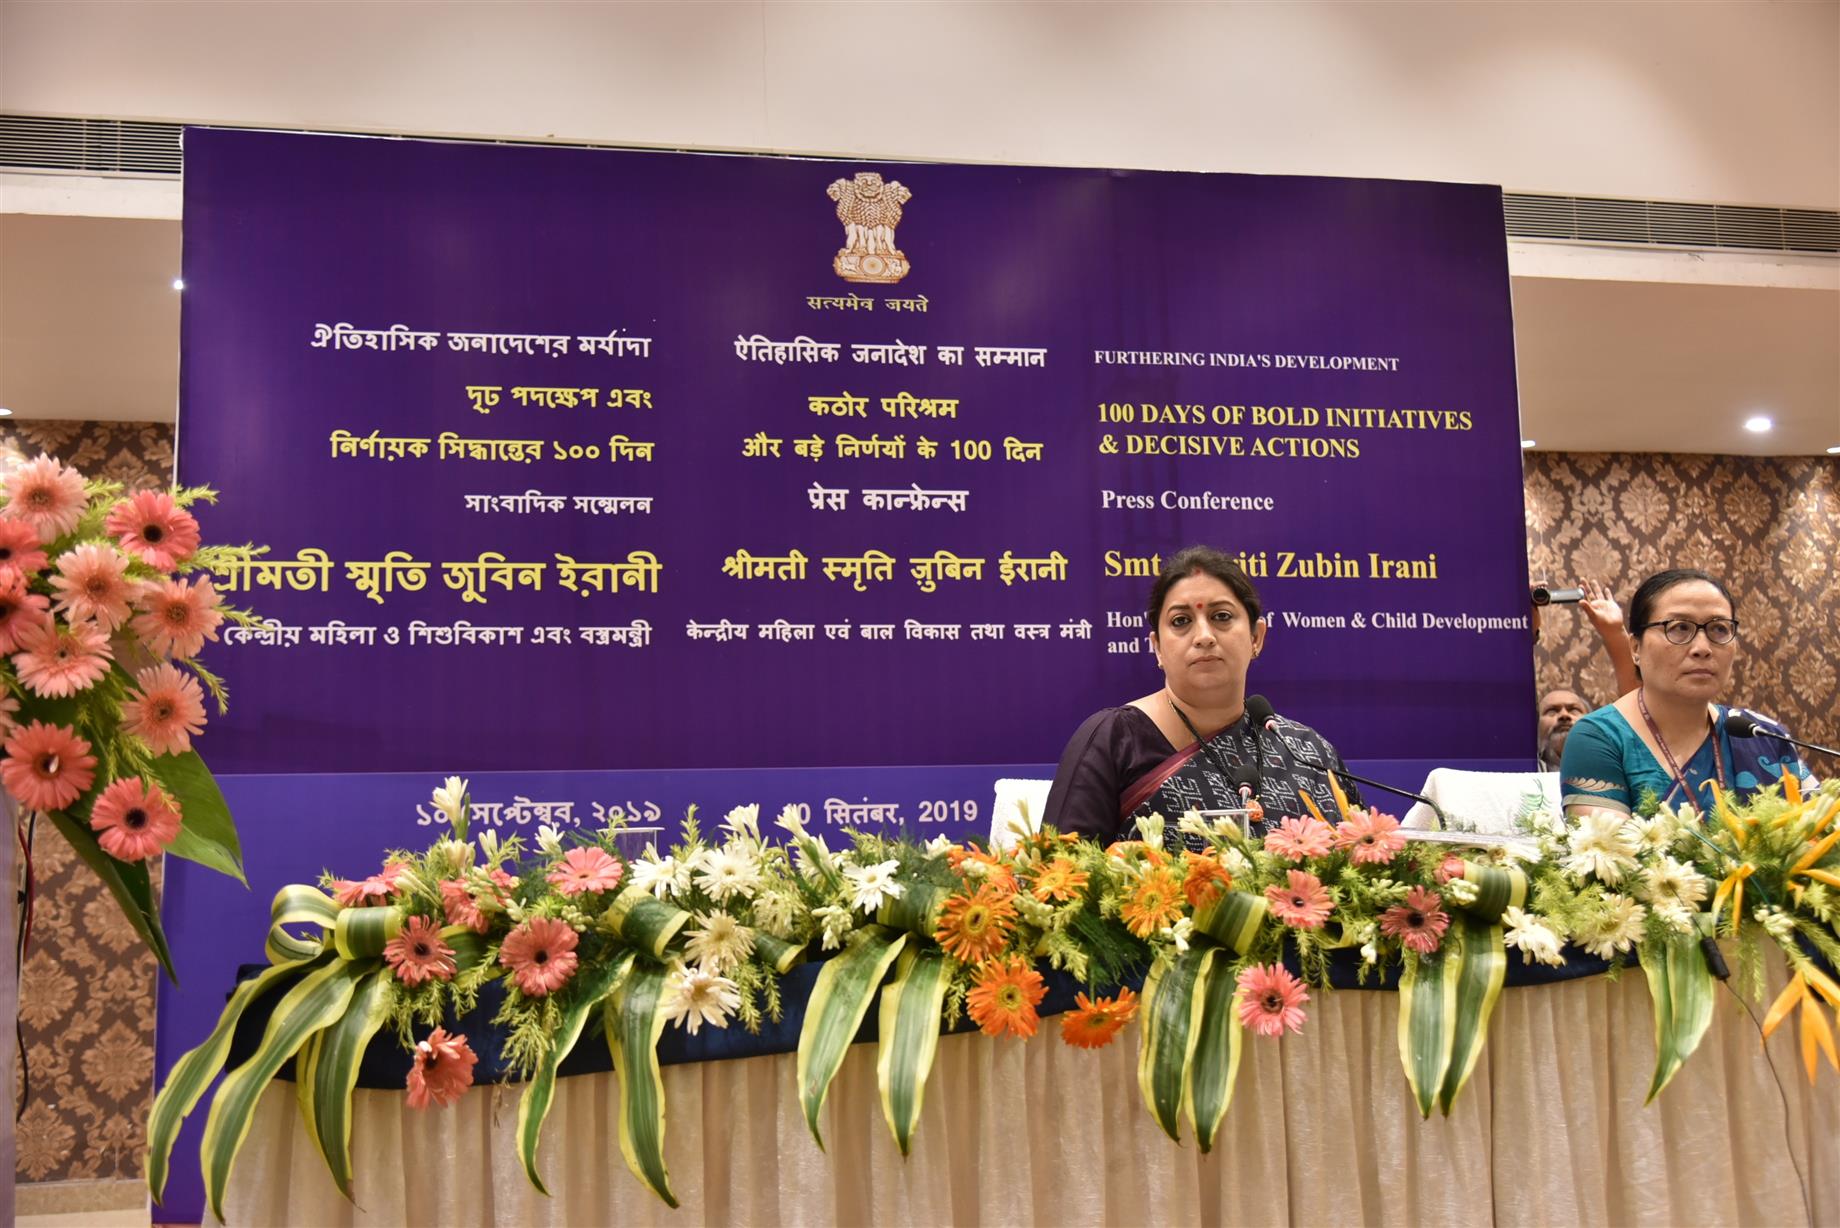 Union Minister for Women and Child Development and Textiles, Smt Smriti Zubin Irani addressing the press conference on 100 days of Bold Initiatives and Decisive Actions taken by the Central Government in Kolkata on September 10, 2019.